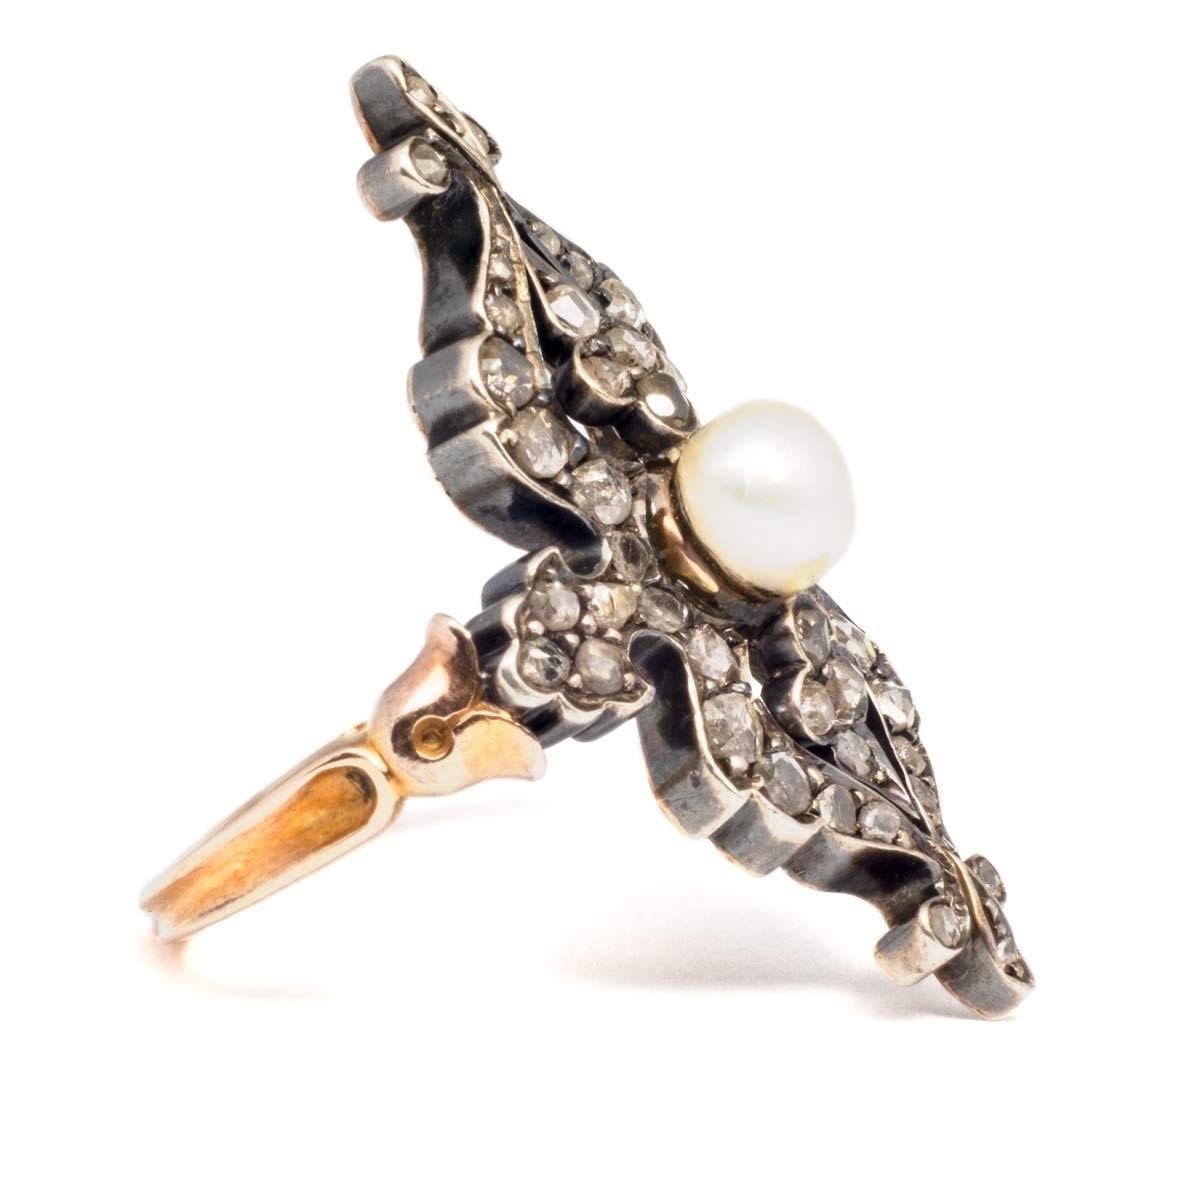 Antique ring from the beginning of the 19th century in 18ct gold and silver. The diamonds are rose cut coroné with a central cultured pearl. The silver and gold combination was typical of that era. 

Italian ring size: 11.5
Dimensions: H 2.9cm x W